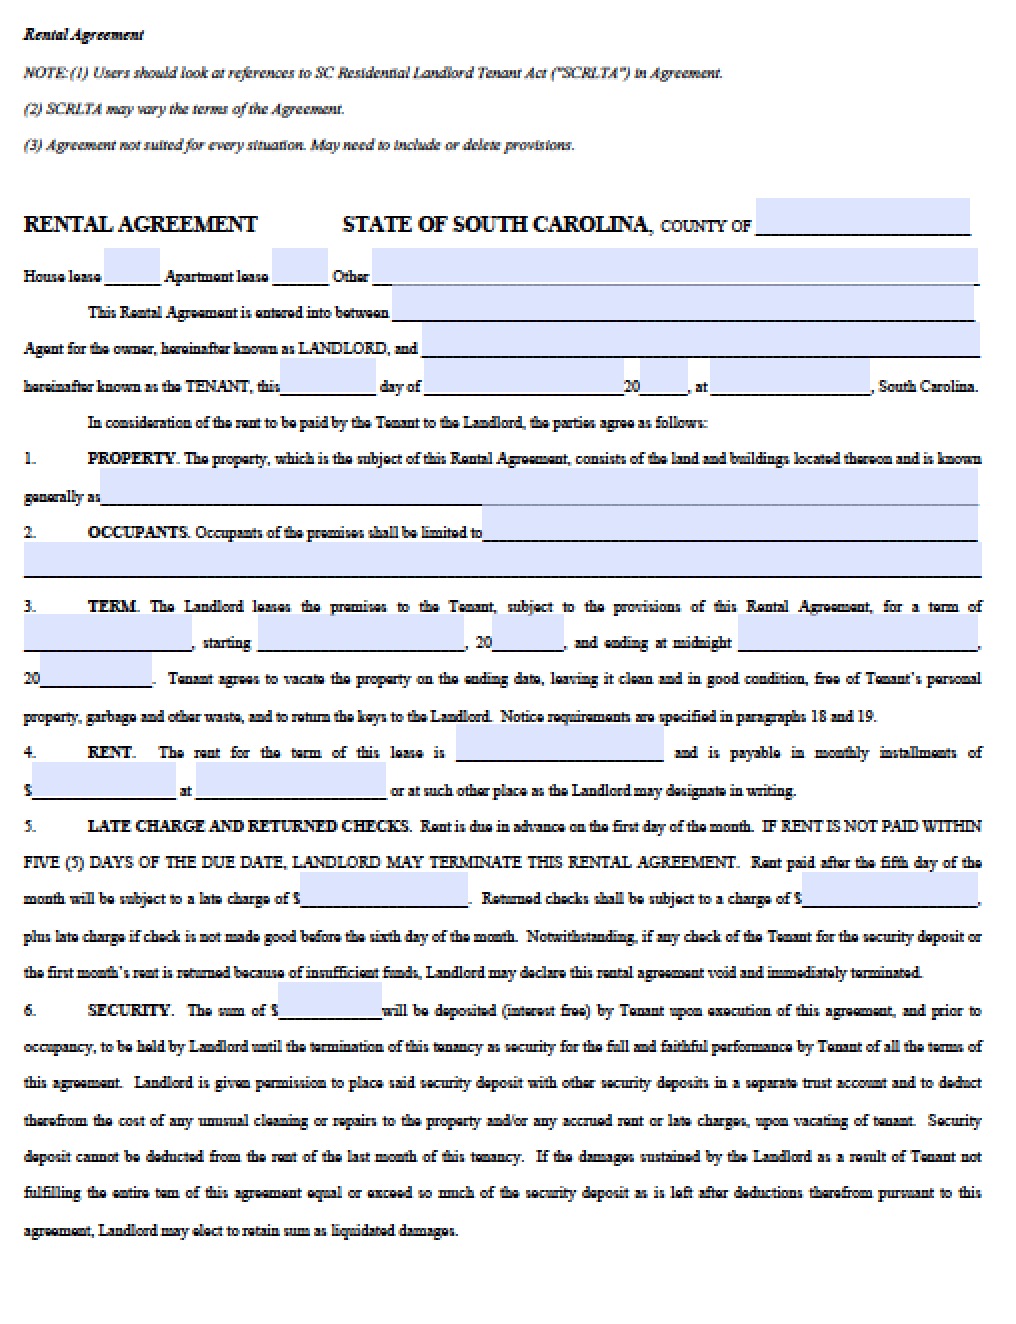 free-south-carolina-standard-residential-lease-agreement-template-pdf-word